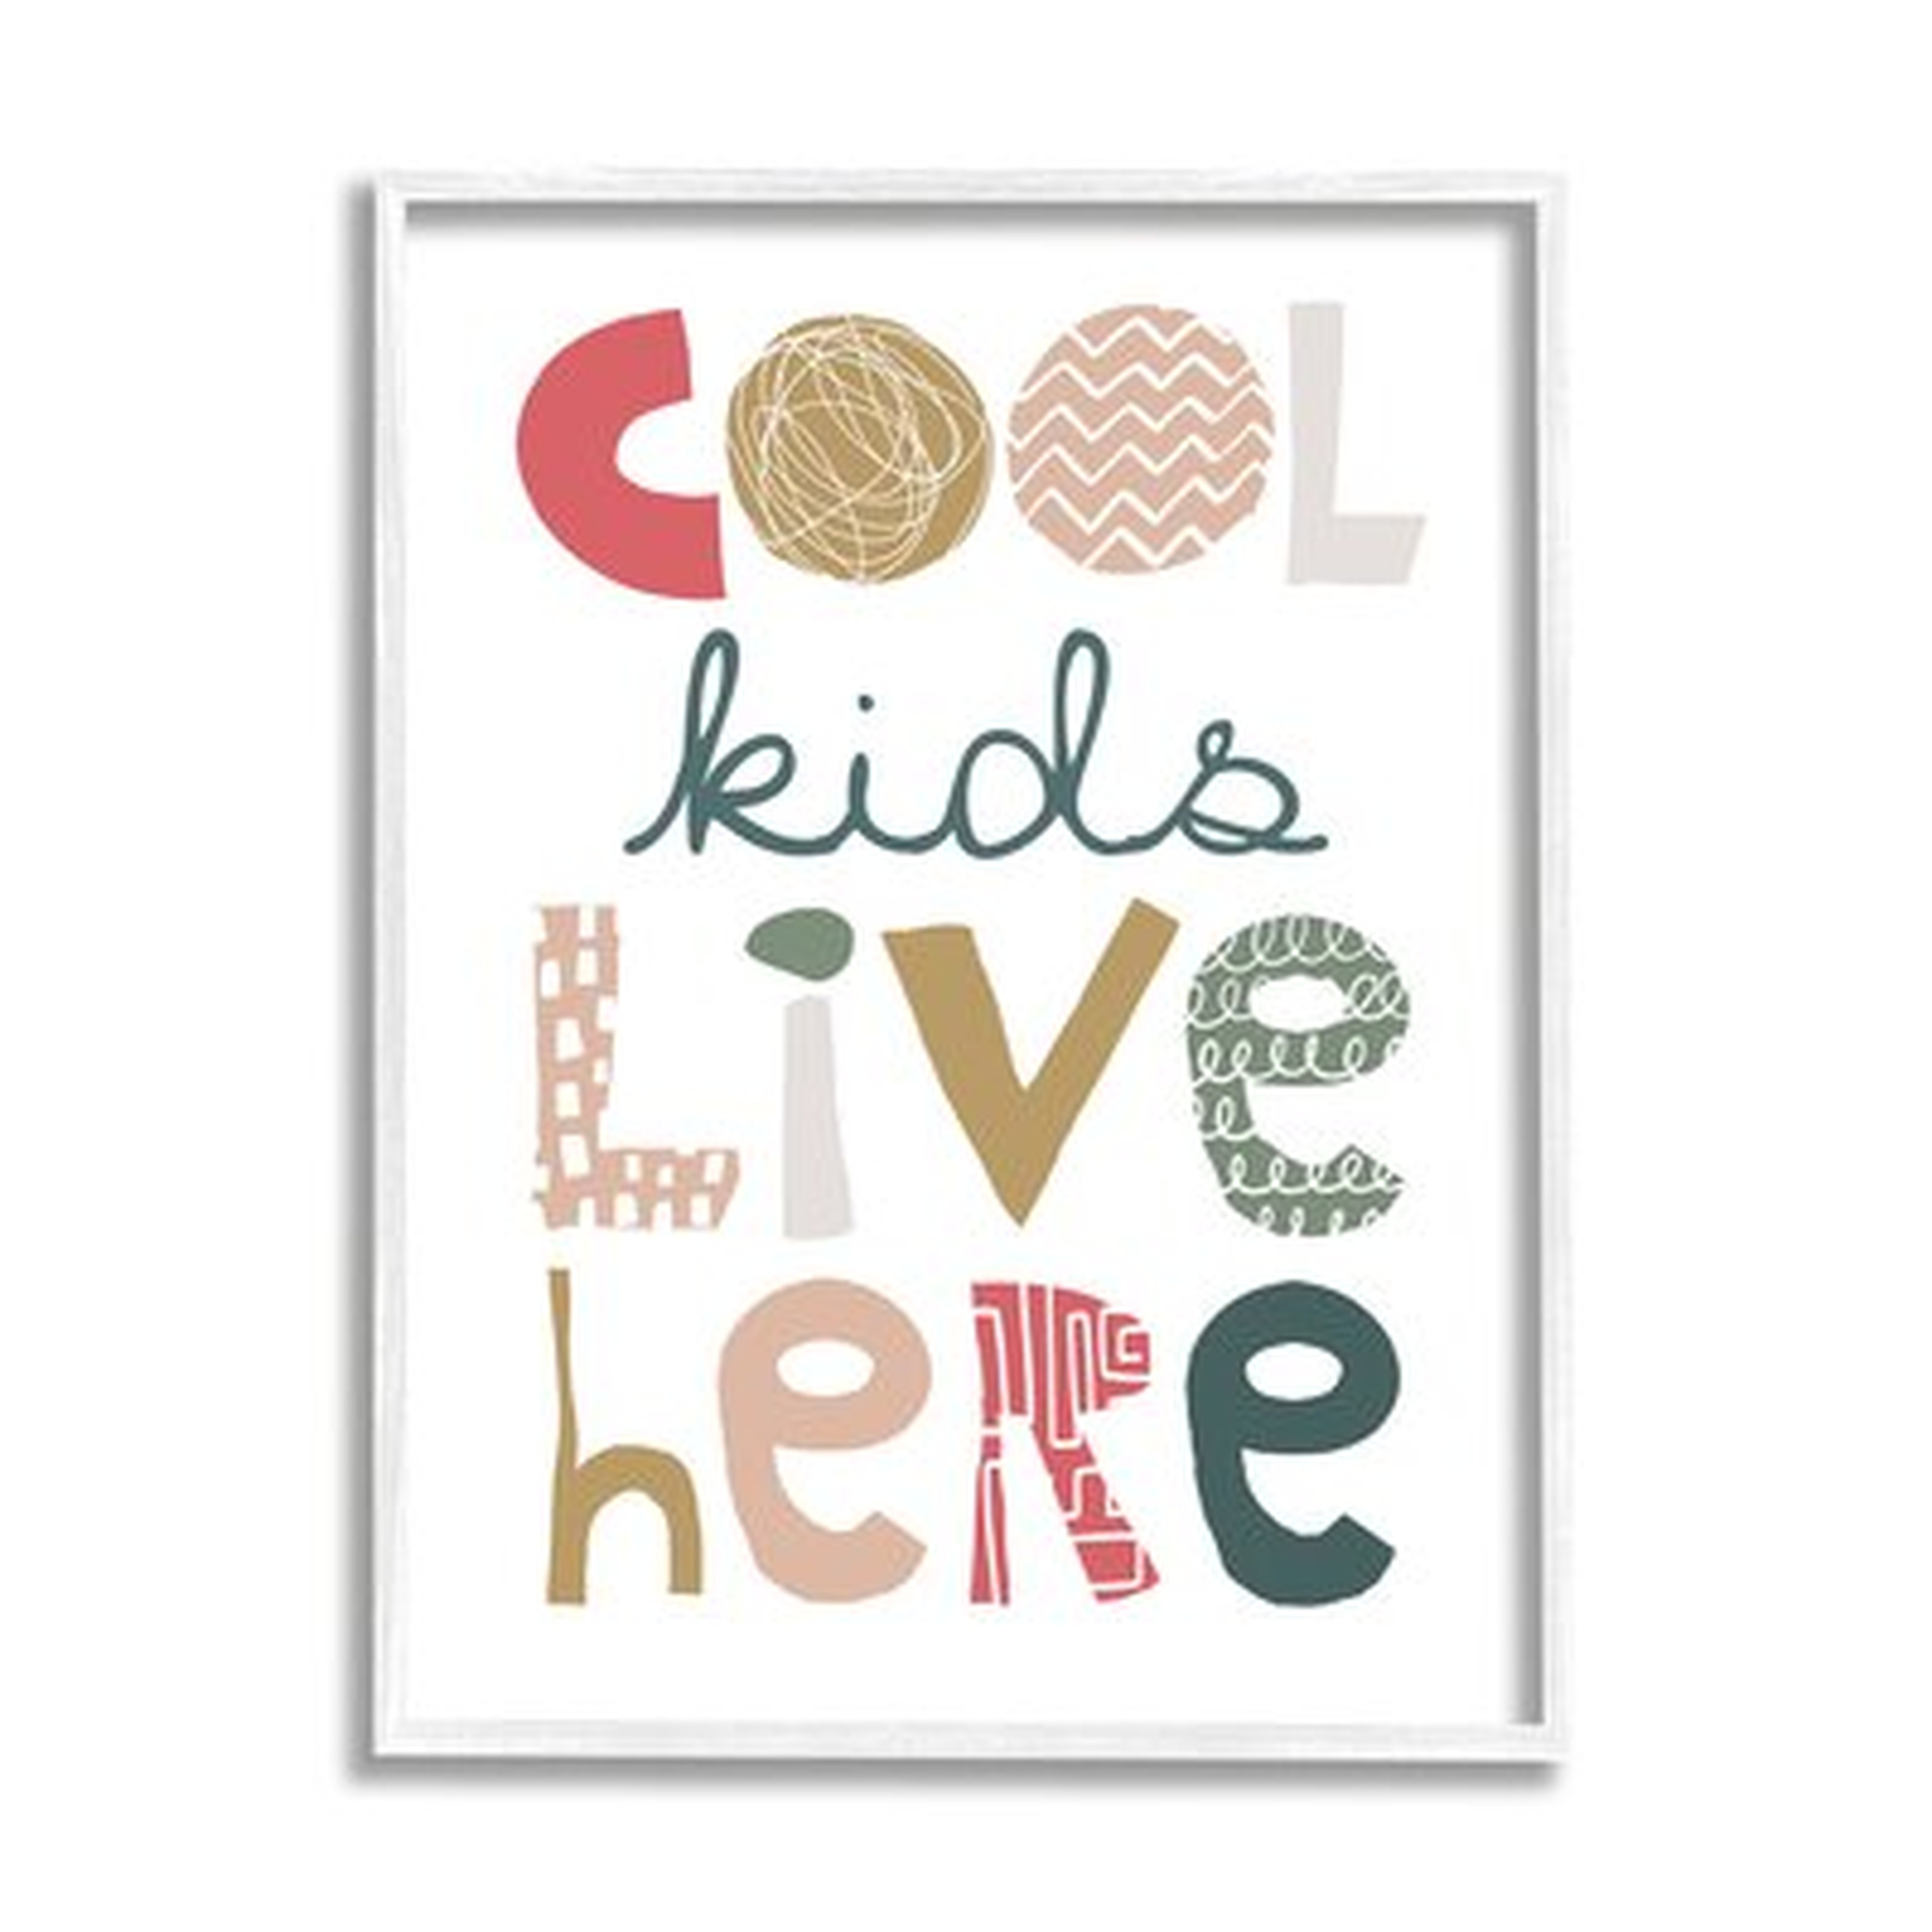 Cool Kids Live Here Phrase Abstract Pattern Typography Gray Farmhouse Rustic Oversized Framed Giclee Texturized Art By Jennifer Mccully - Wayfair